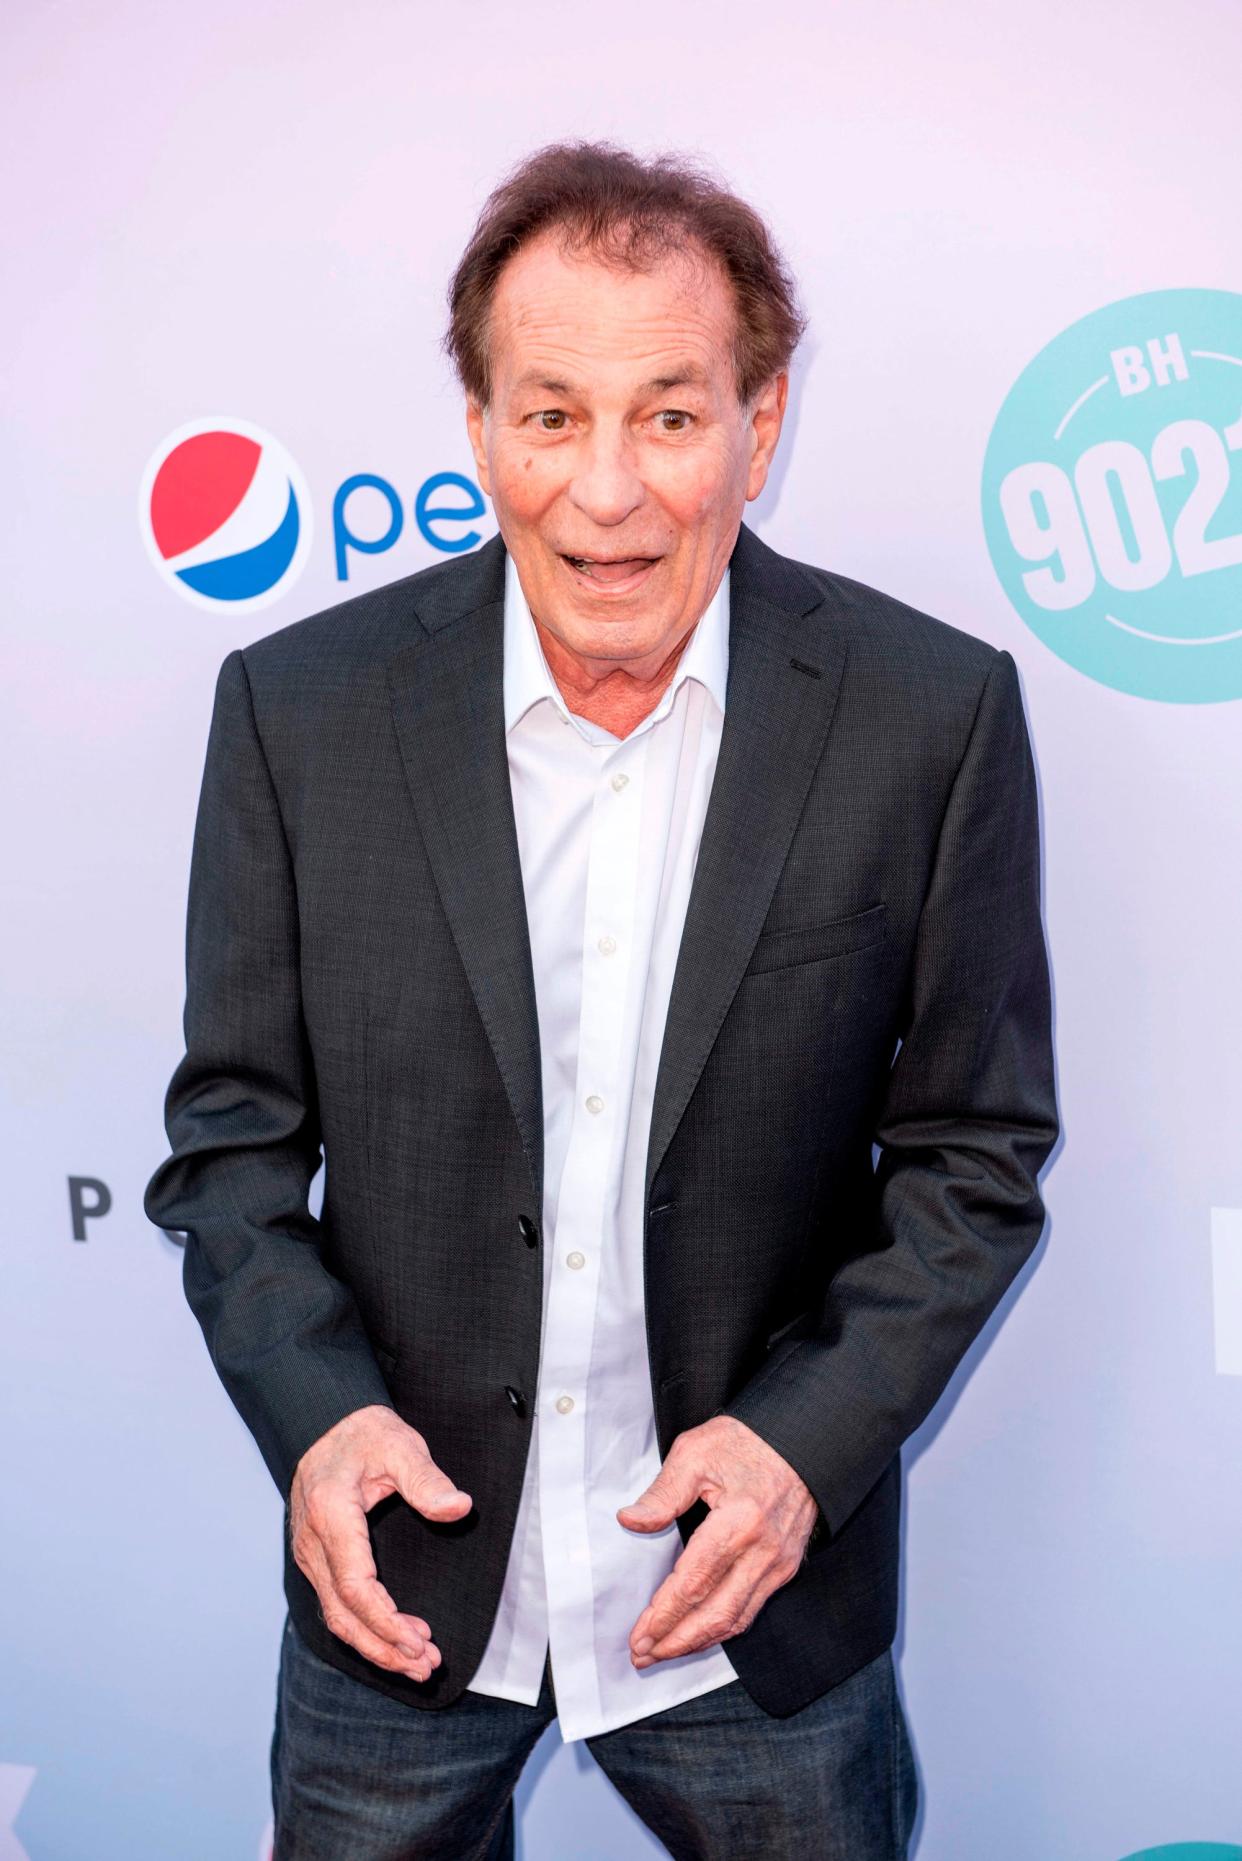 Actor Joe E. Tata arrives for the premiere of "BH90210," a reboot of  "Beverly Hills, 90210," on Aug. 3, 2019, at the Peach Pit Pop-Up in Los Angeles. Tata, best known for his role on the ‘90s teen drama, has died at the age of 85 following a battle with Alzheimer’s disease.